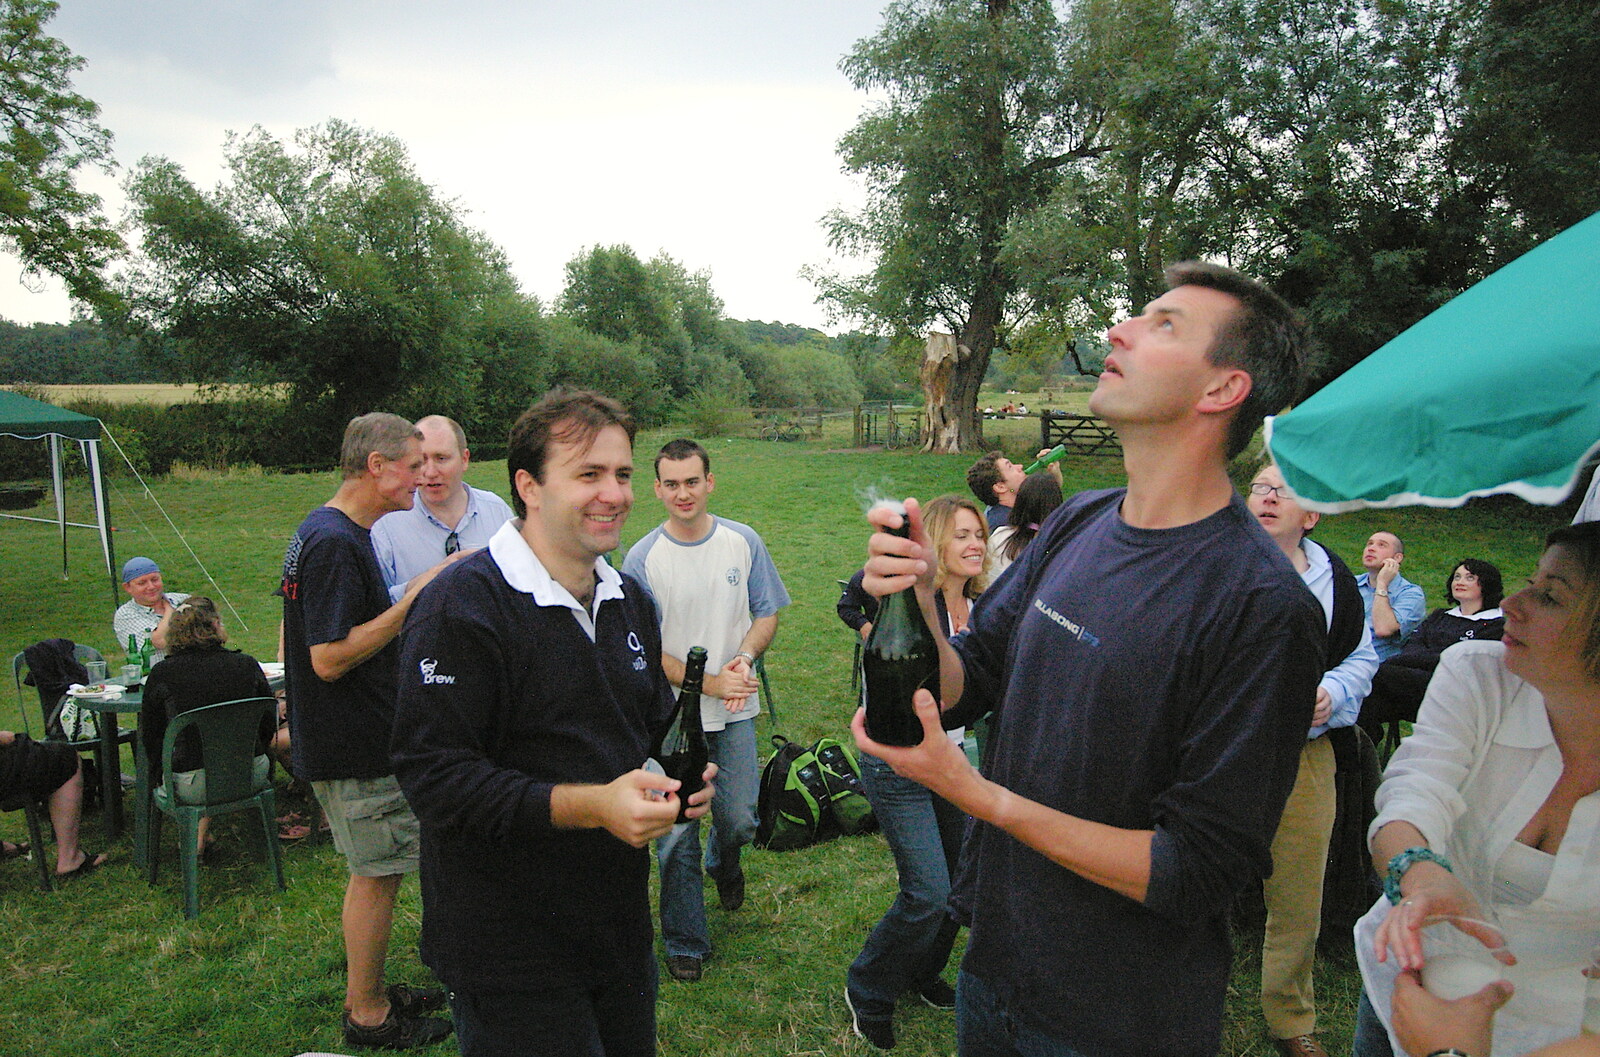 A champagne cork is popped from Qualcomm goes Punting on the Cam, Grantchester Meadows, Cambridge - 18th August 2005